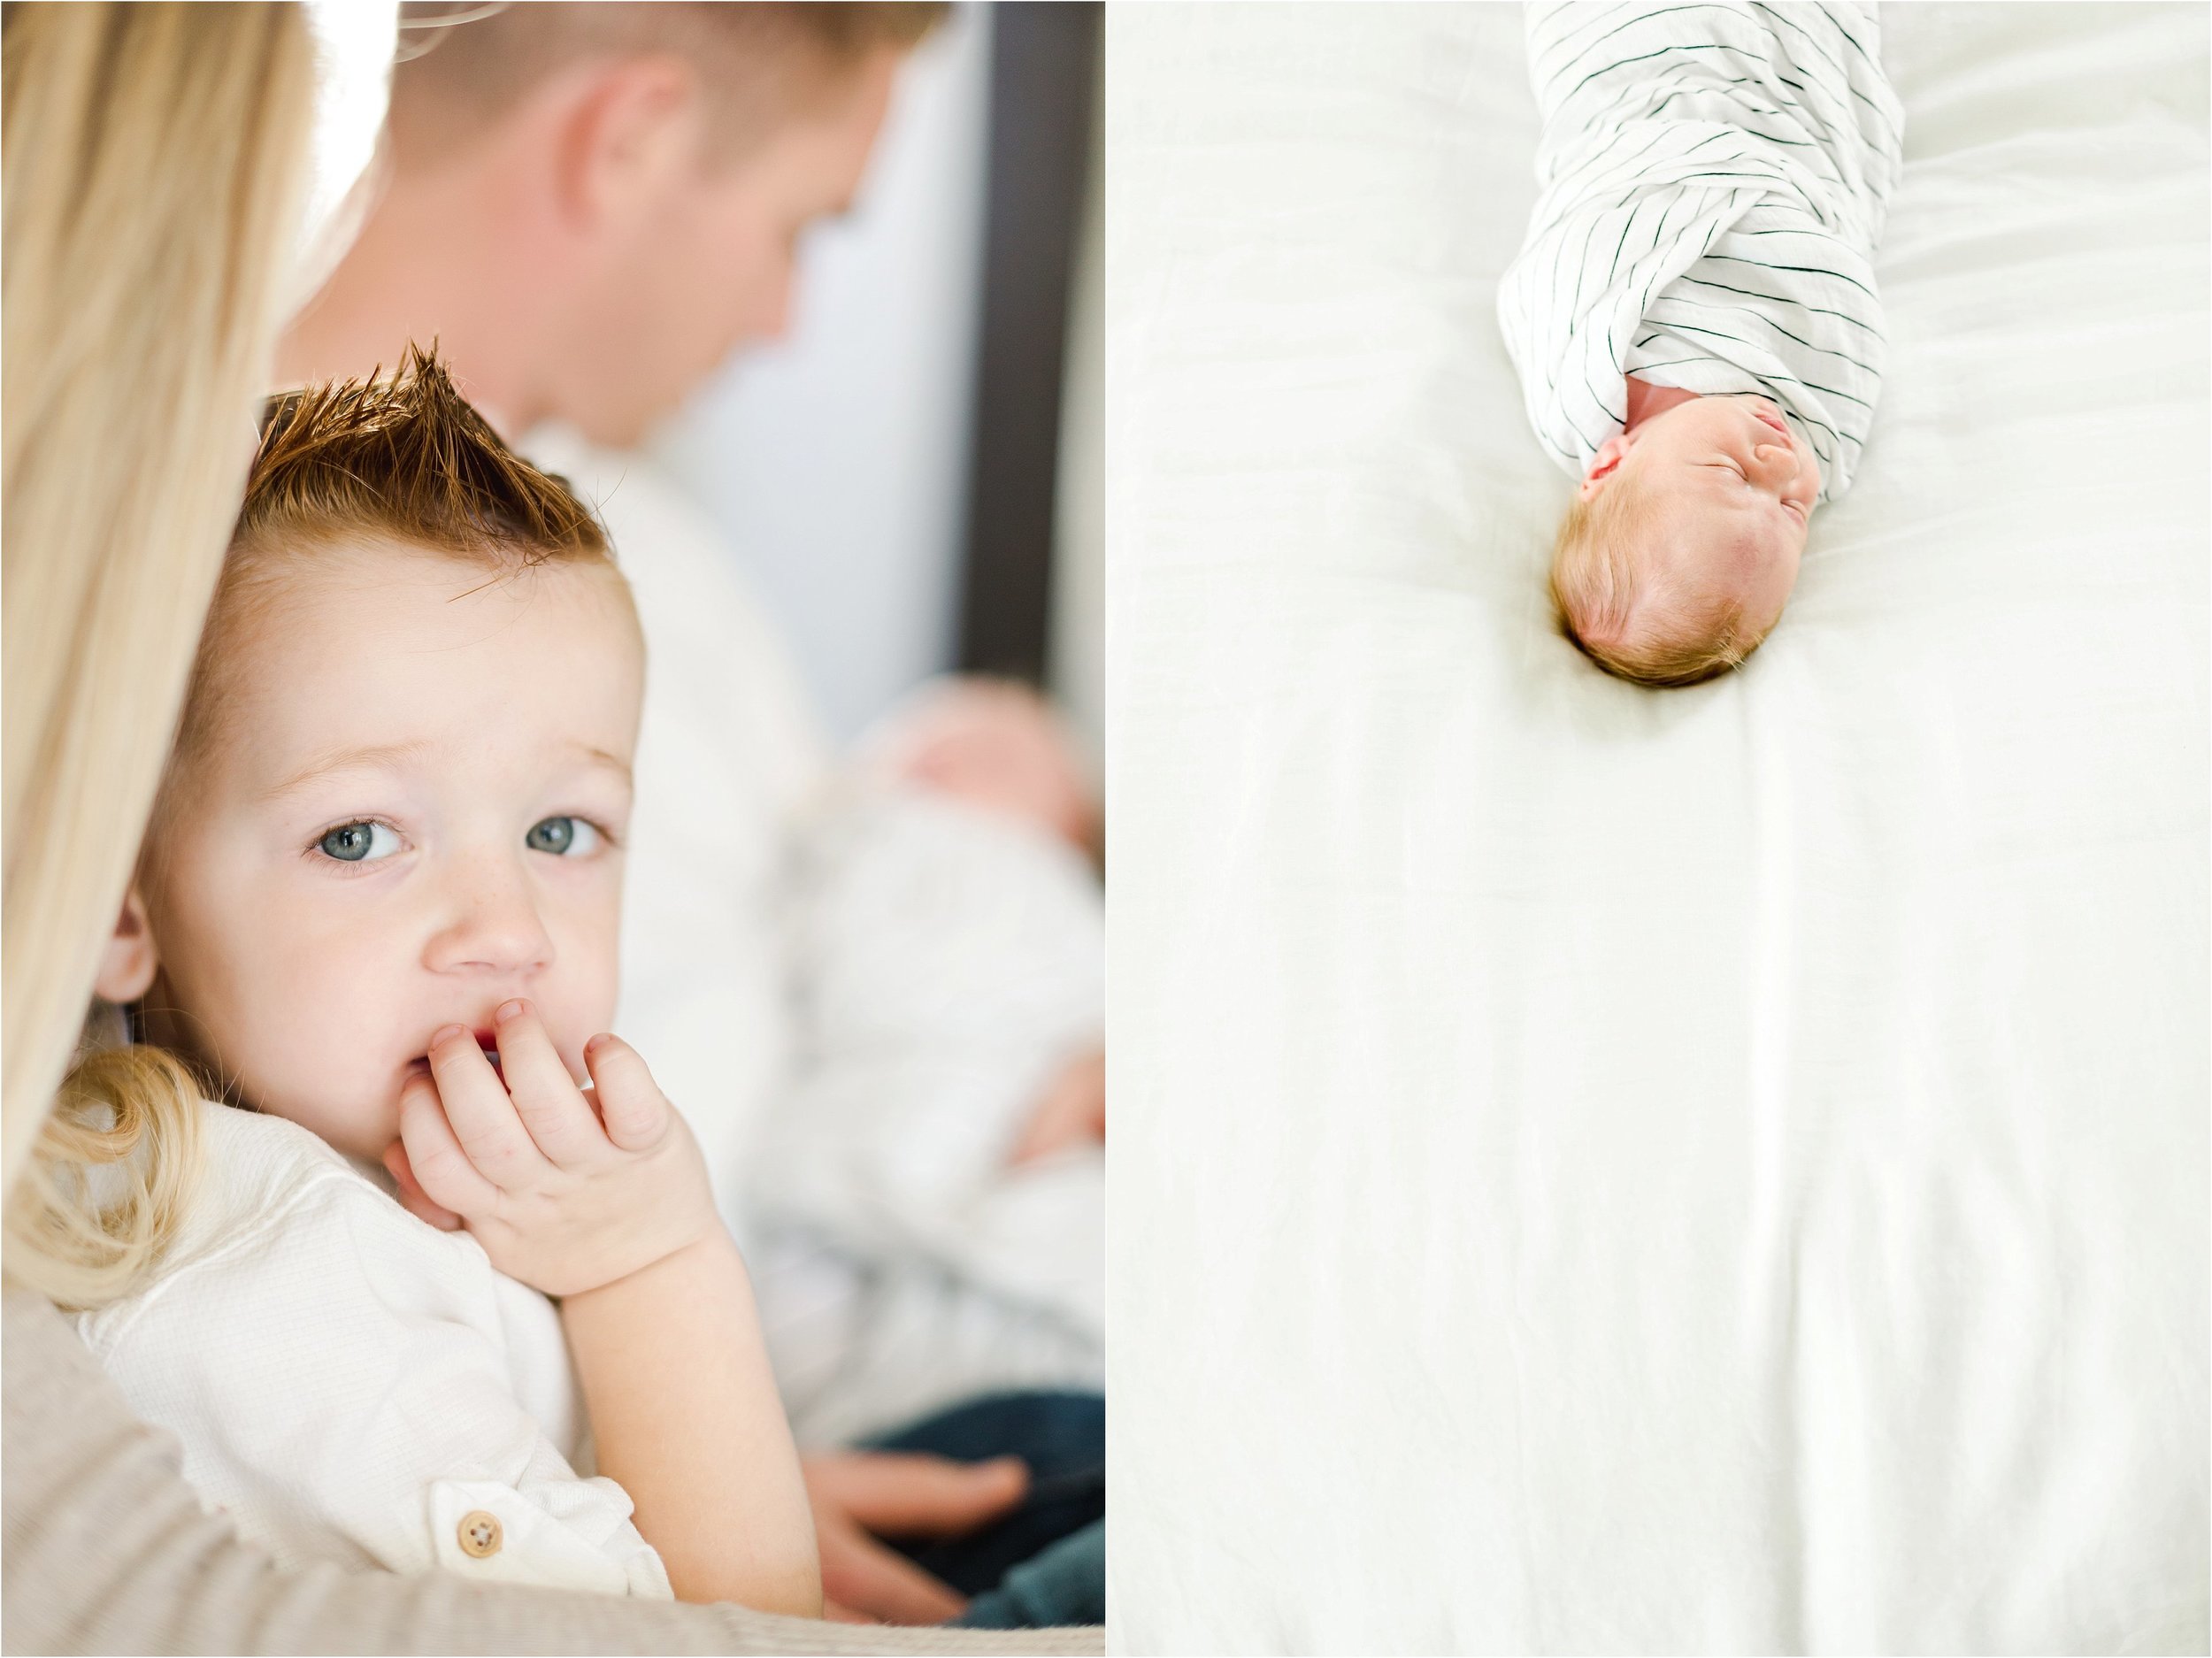 Image on the left shows Mother holding her oldest son in her lap as he looks at the camera.  Image on the right shows overhead shot of baby boy asleep on the bed.